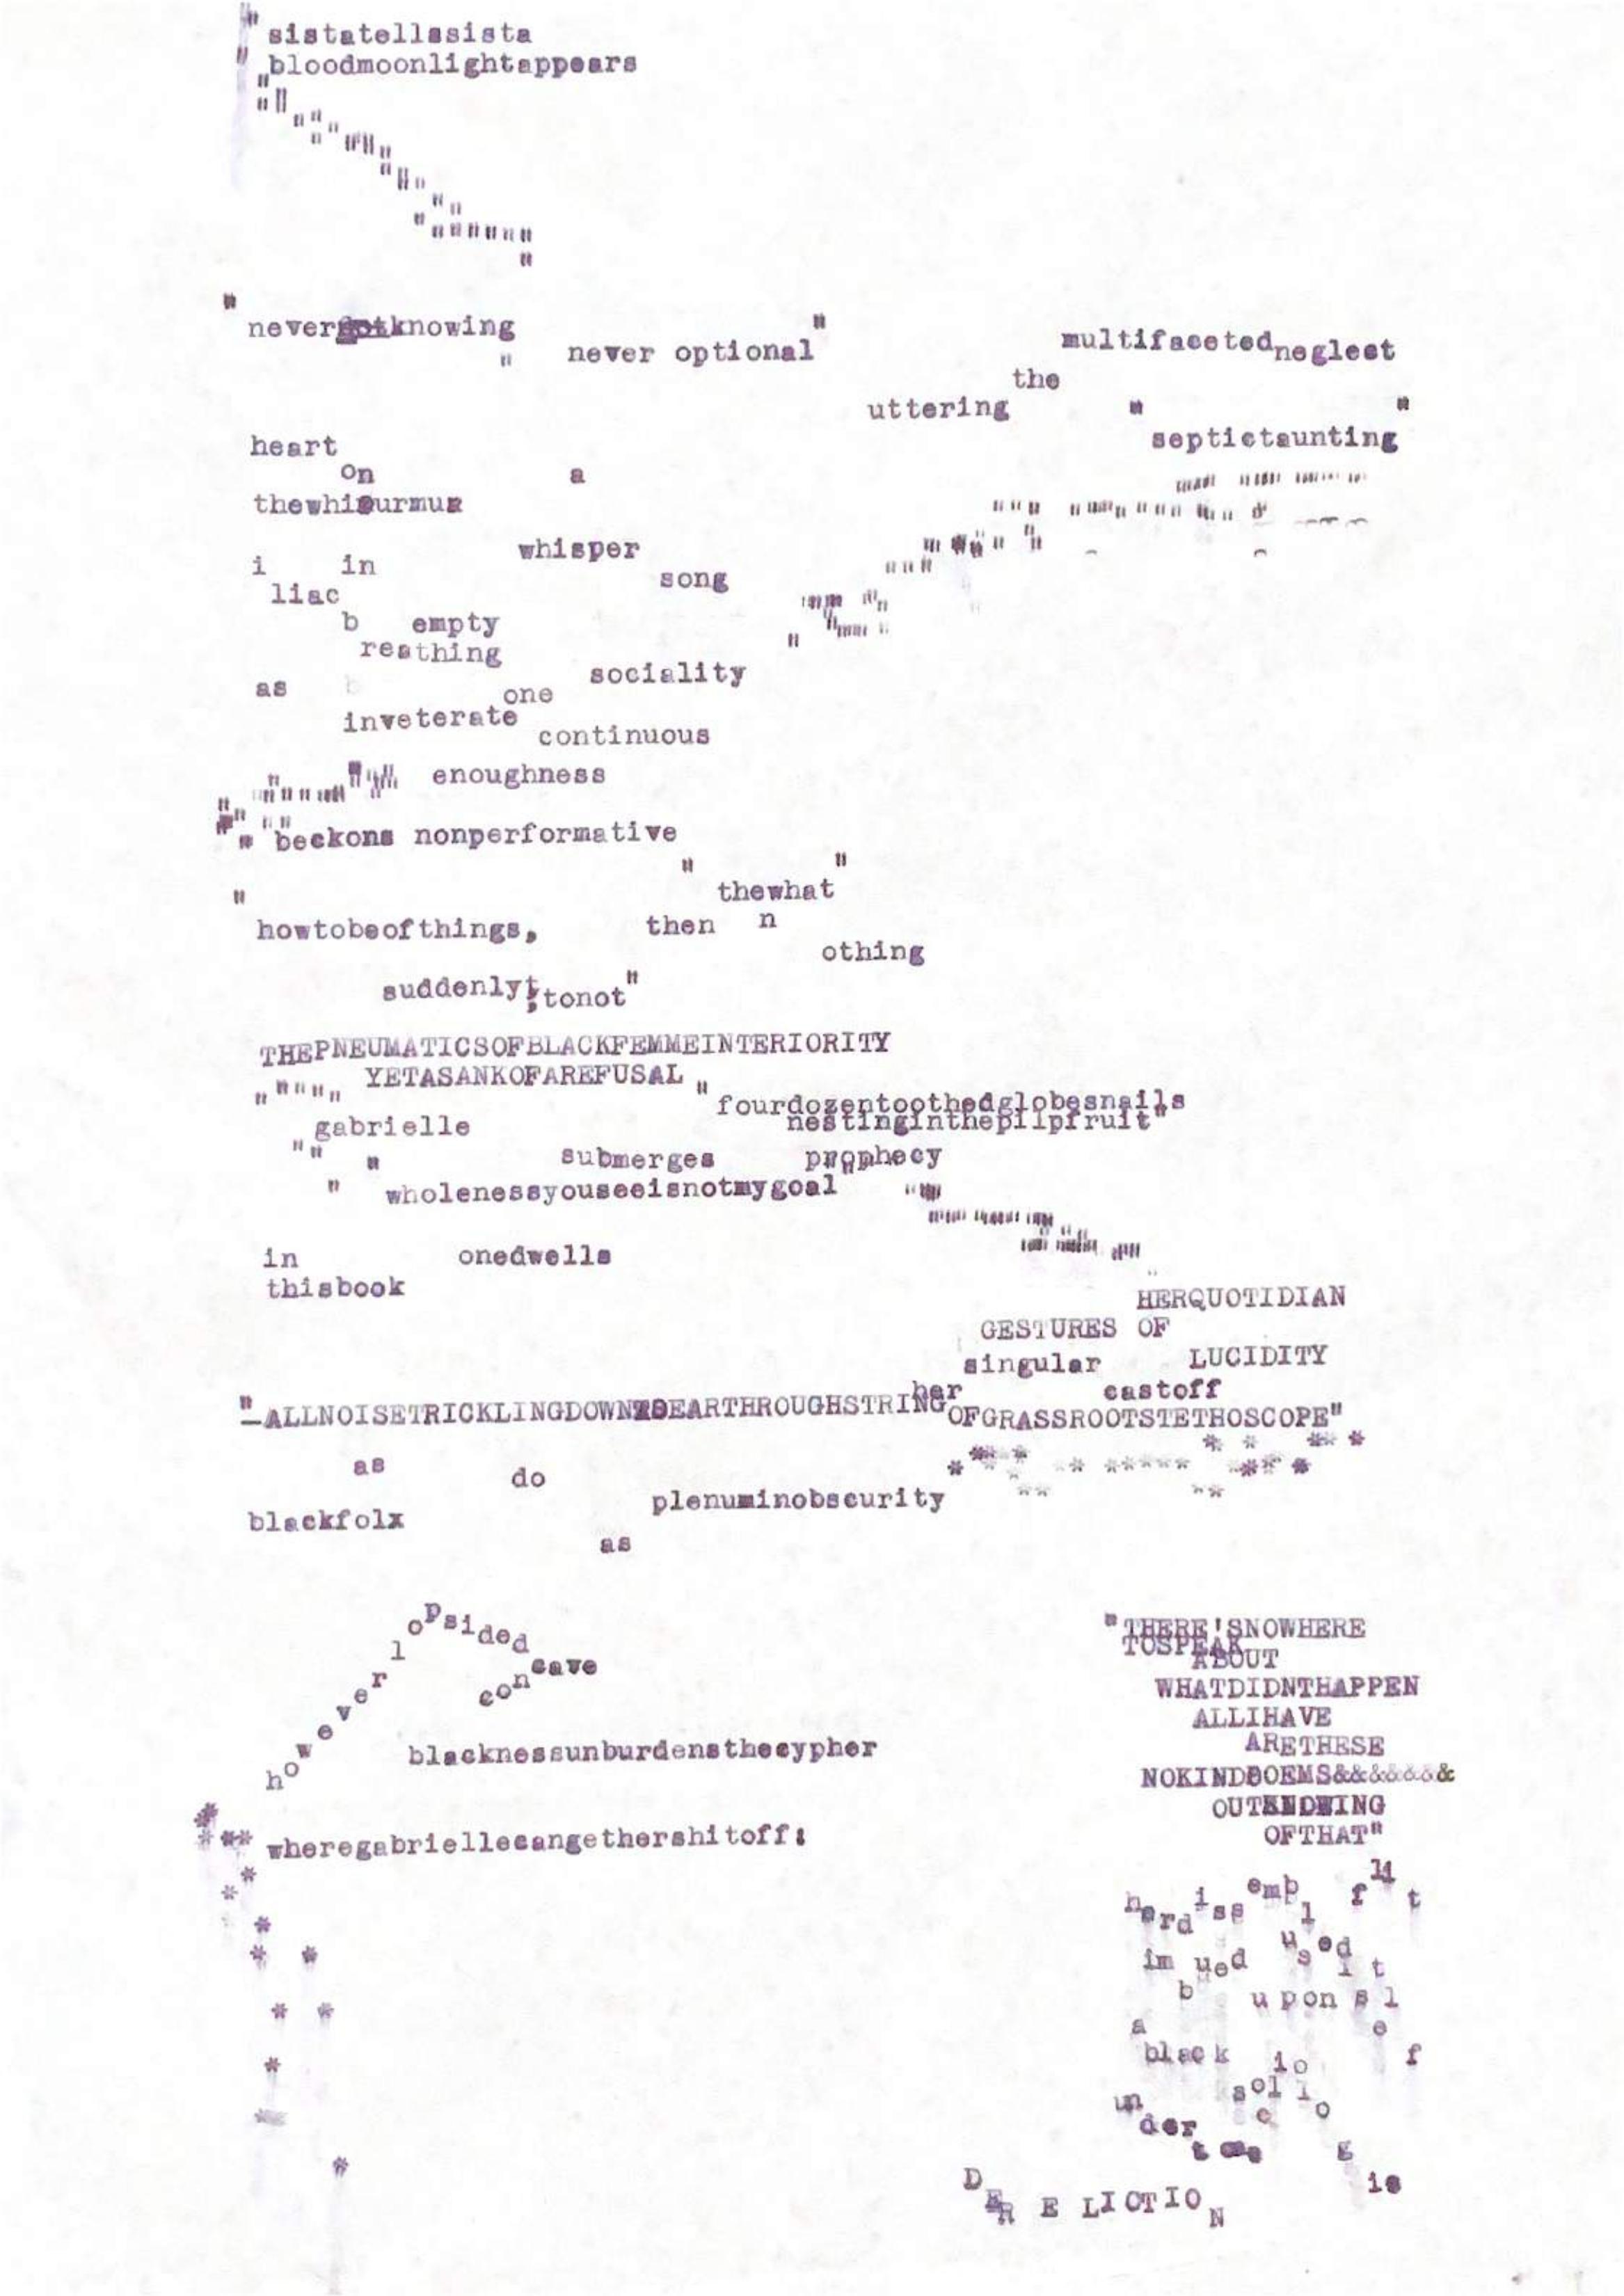 A concrete poem written with a typewriter.